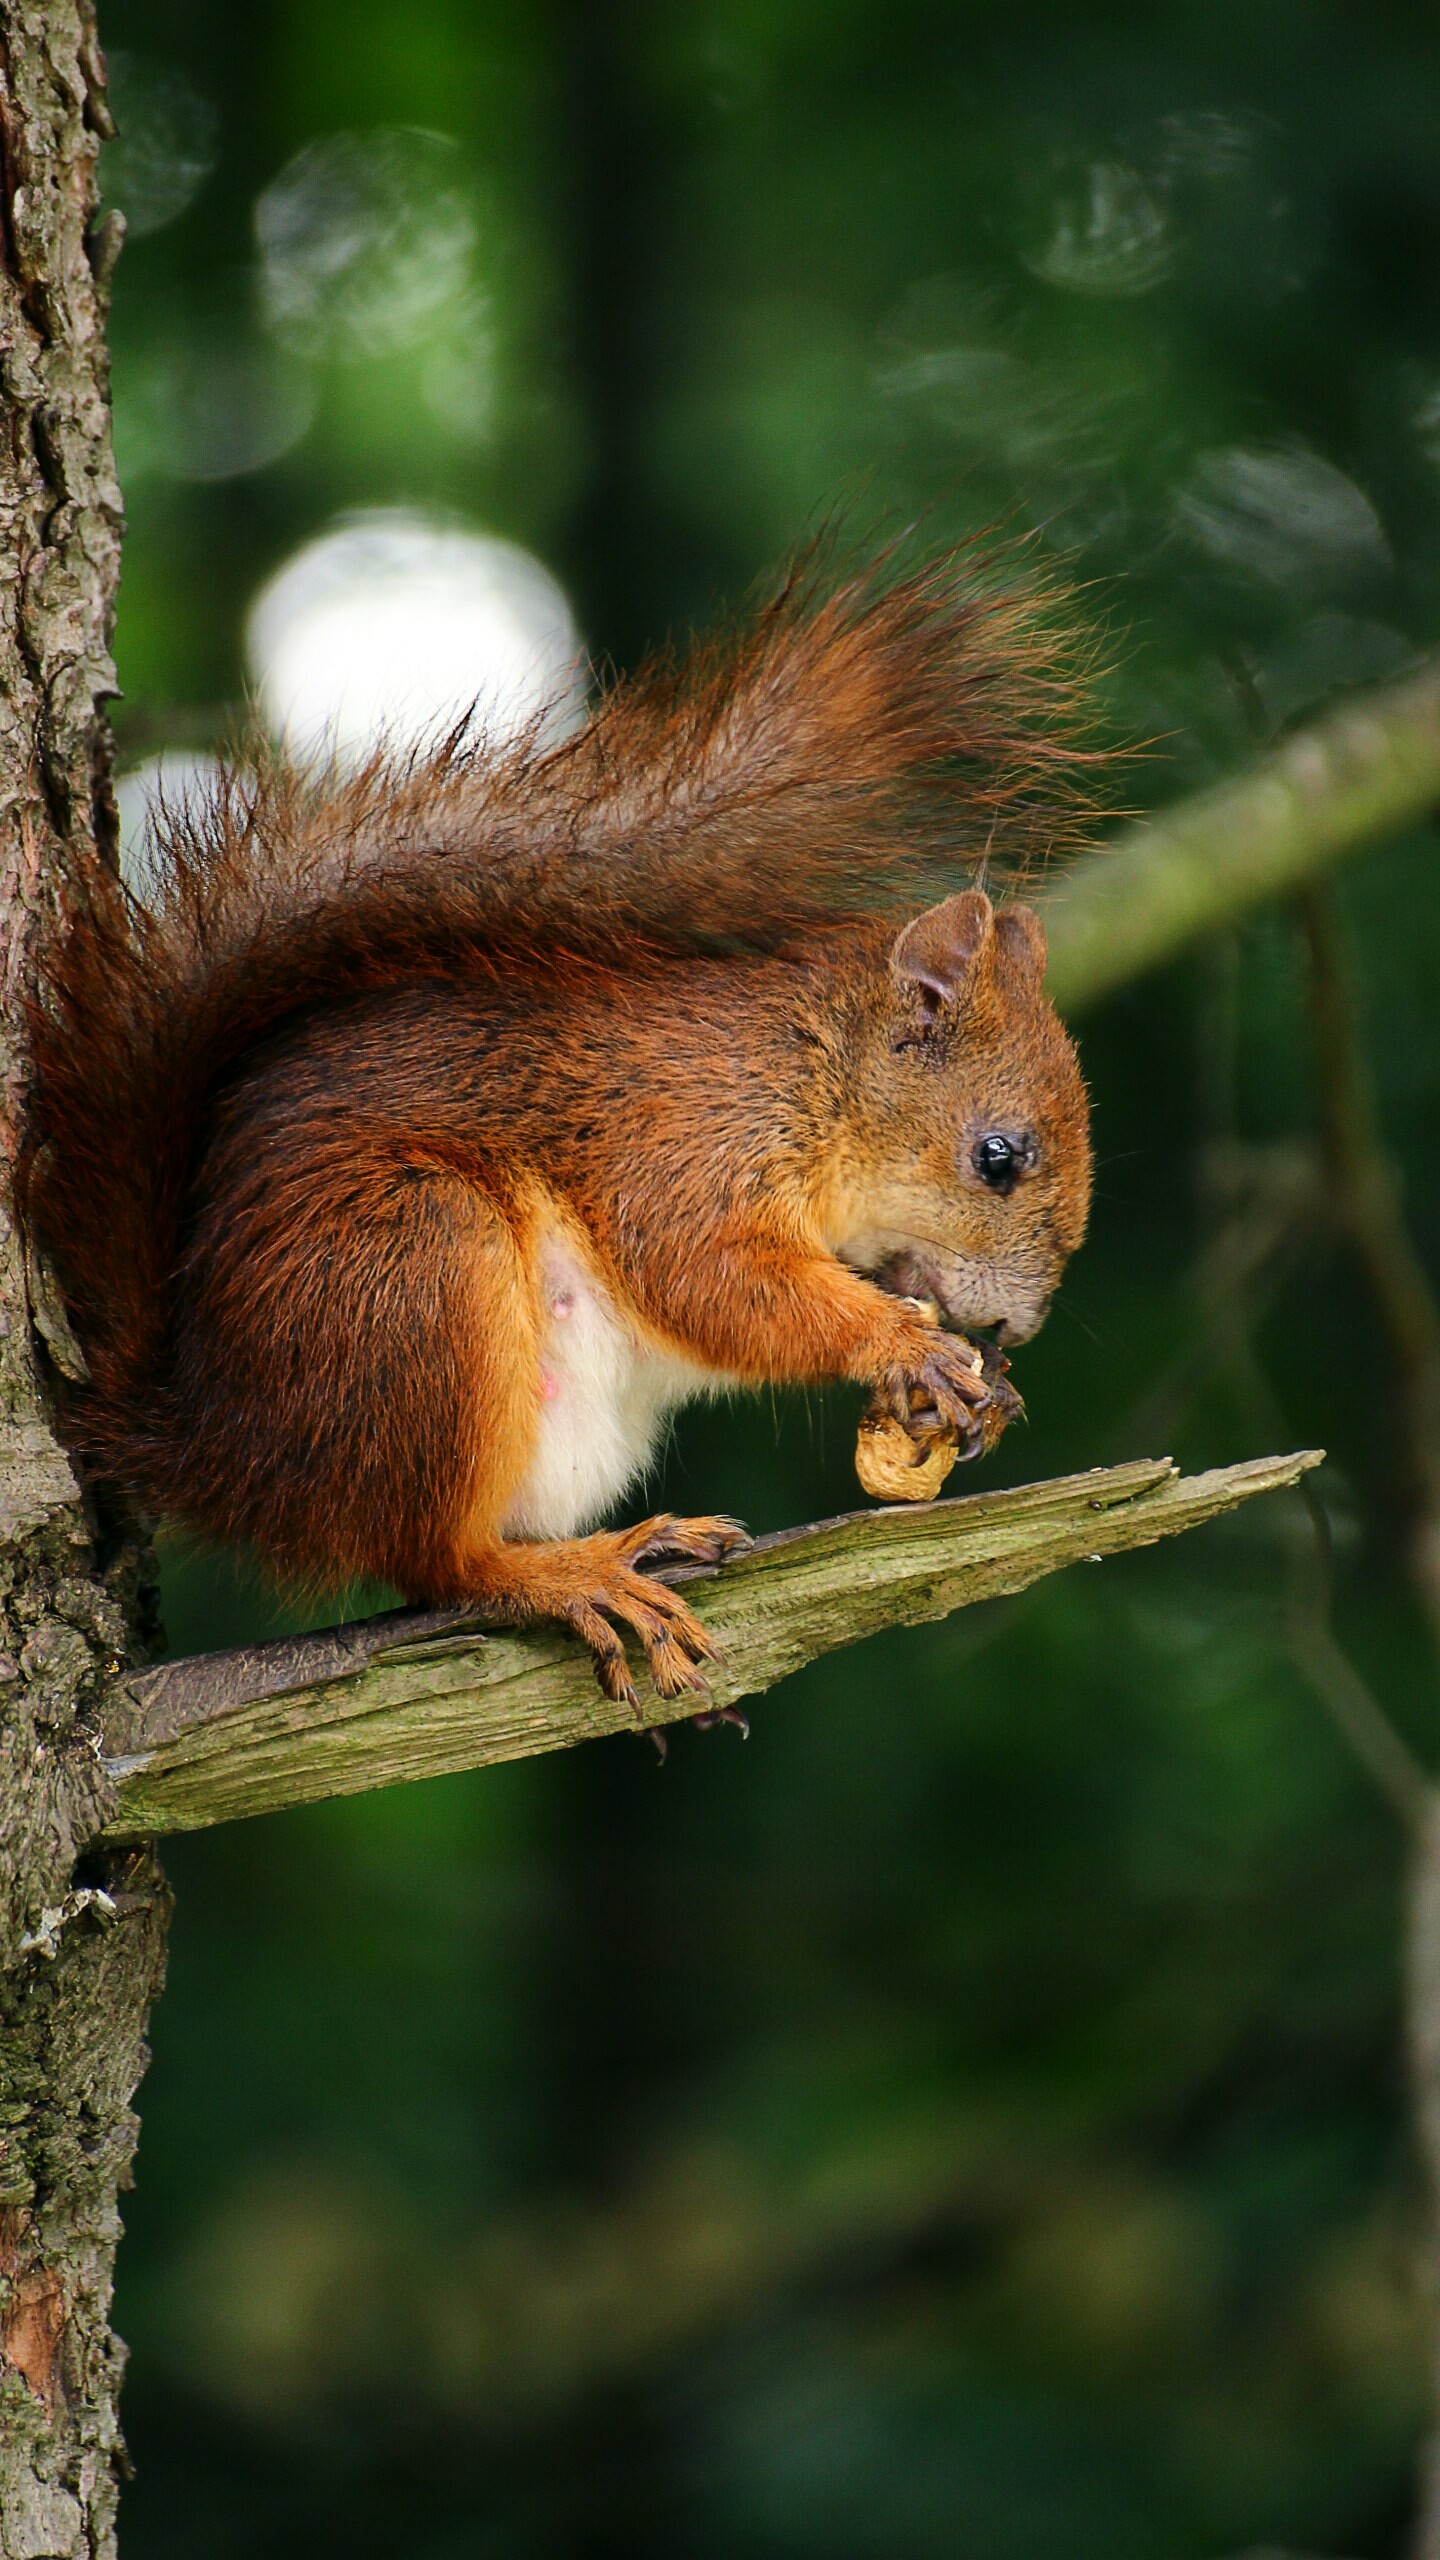 Squirrel: Animals of deciduous woodland, dependant upon the large seeds of such trees as oak, beech, hazel. 1440x2560 HD Wallpaper.